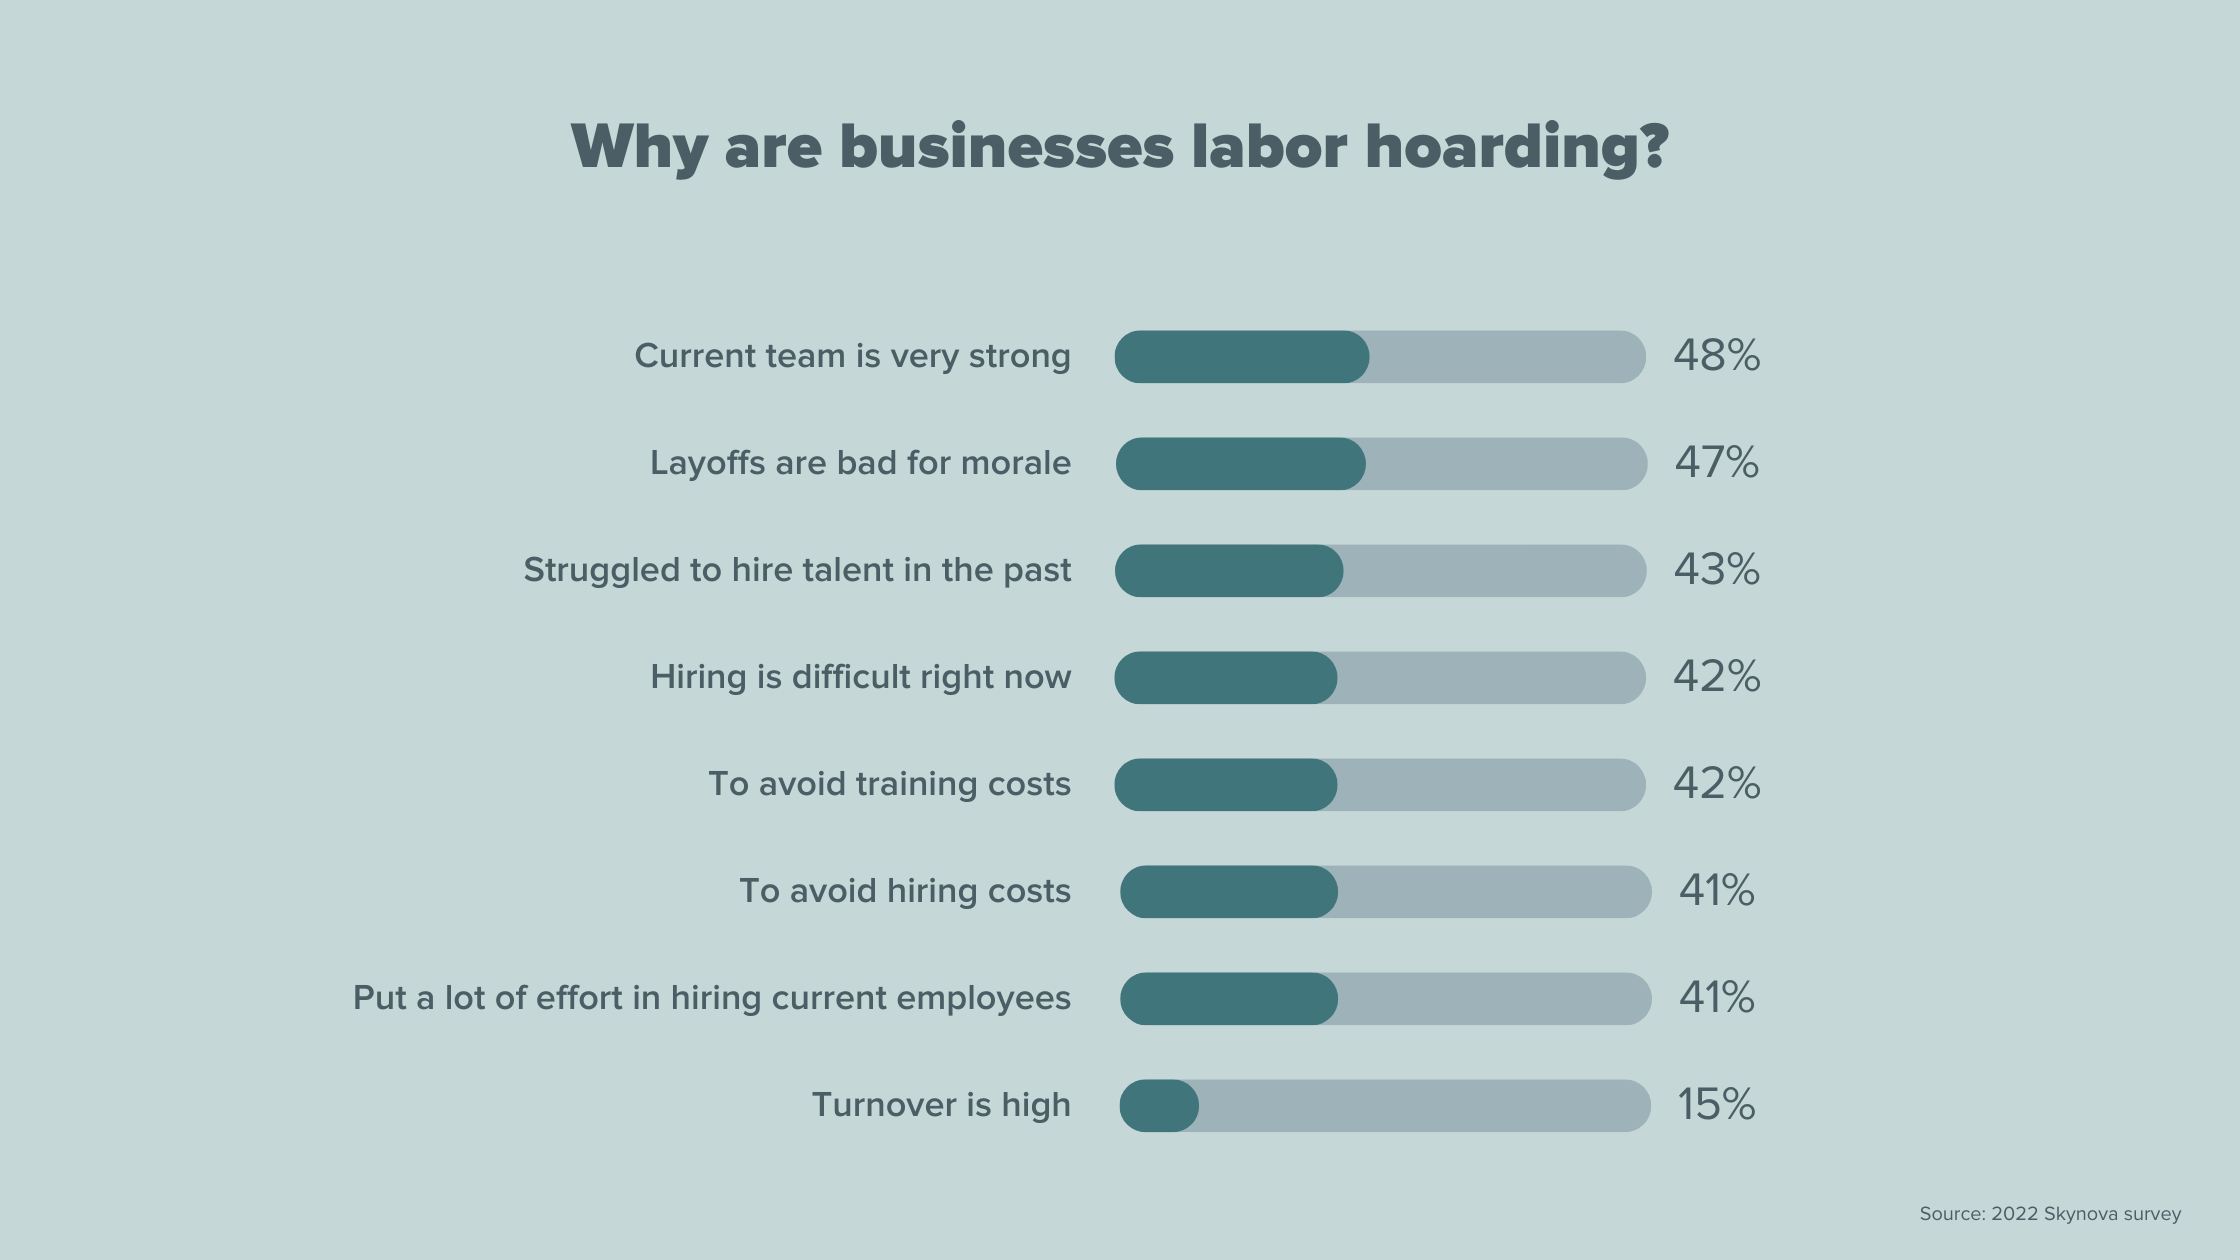 A graph showcases the percentages of why businesses are labor hoarding according to the Skynova 2022 survey. 